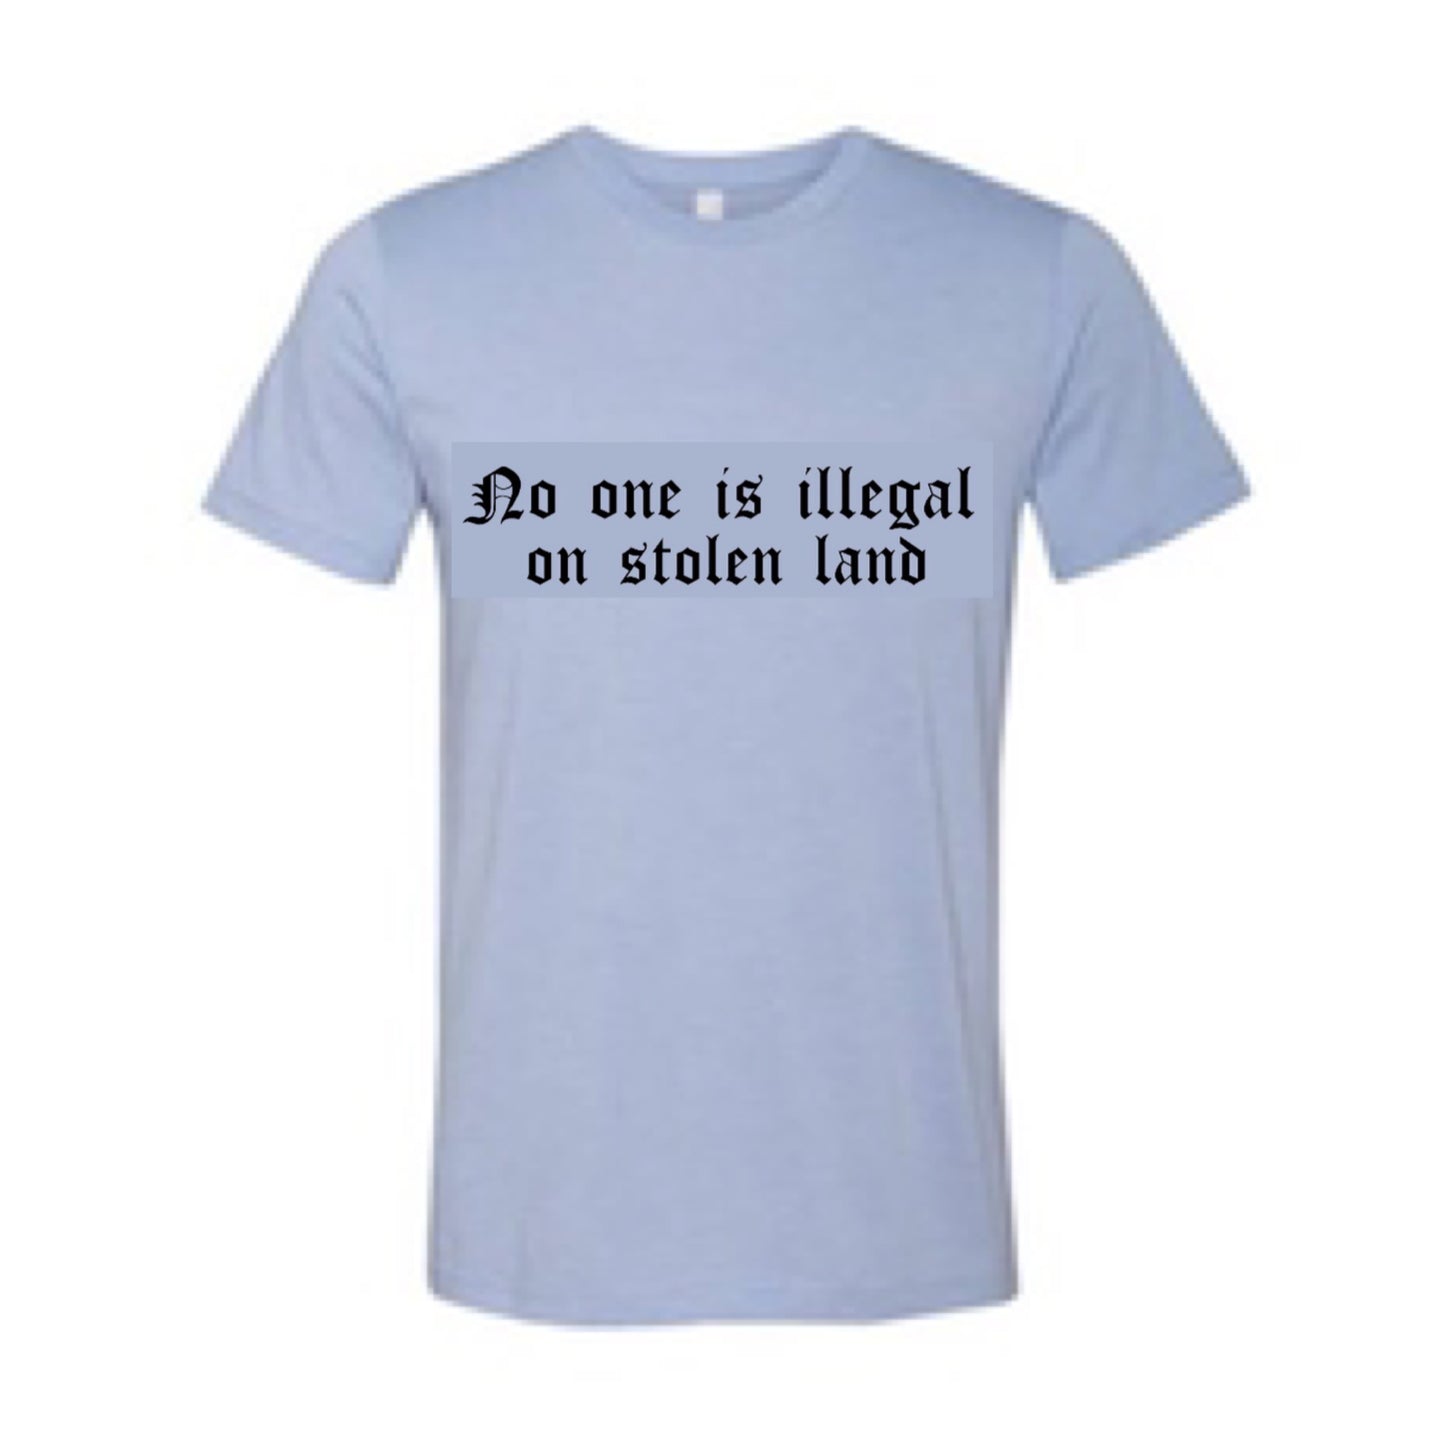 No one is illegal on stolen land unisex short-sleeve T-shirt